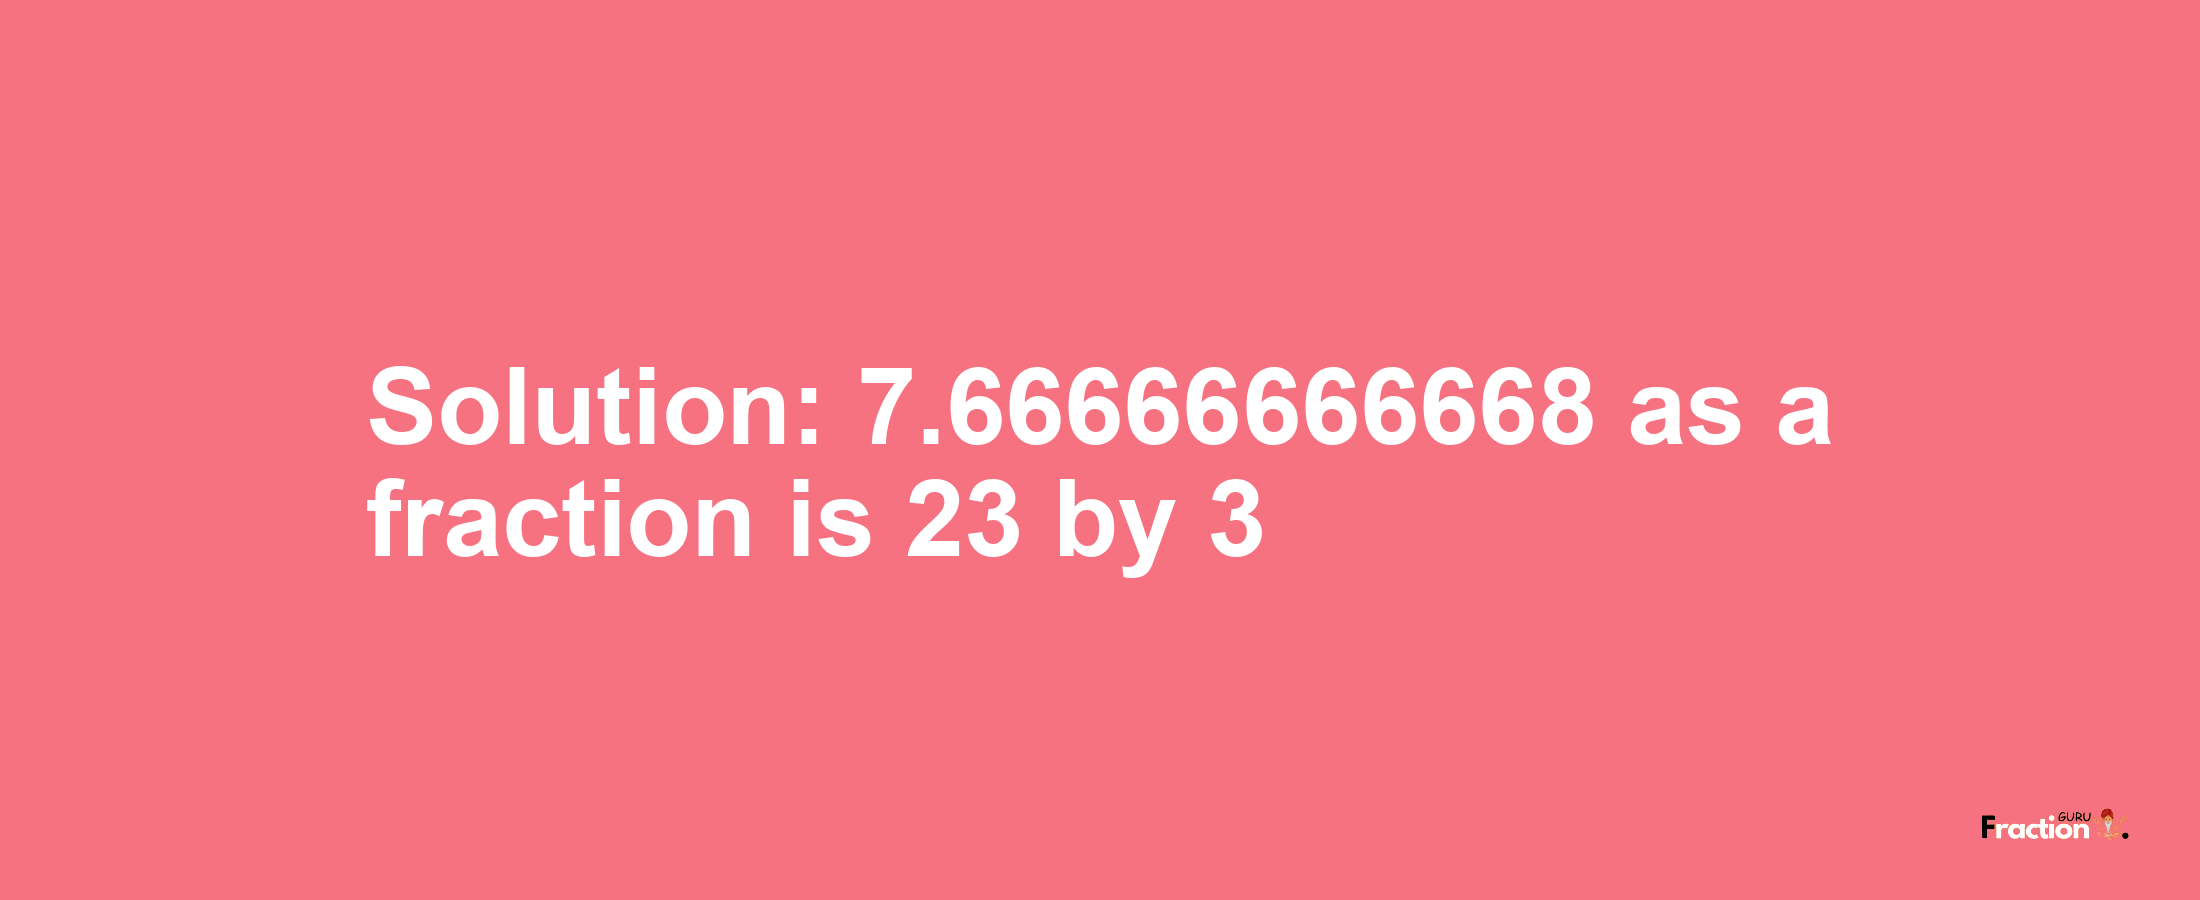 Solution:7.66666666668 as a fraction is 23/3